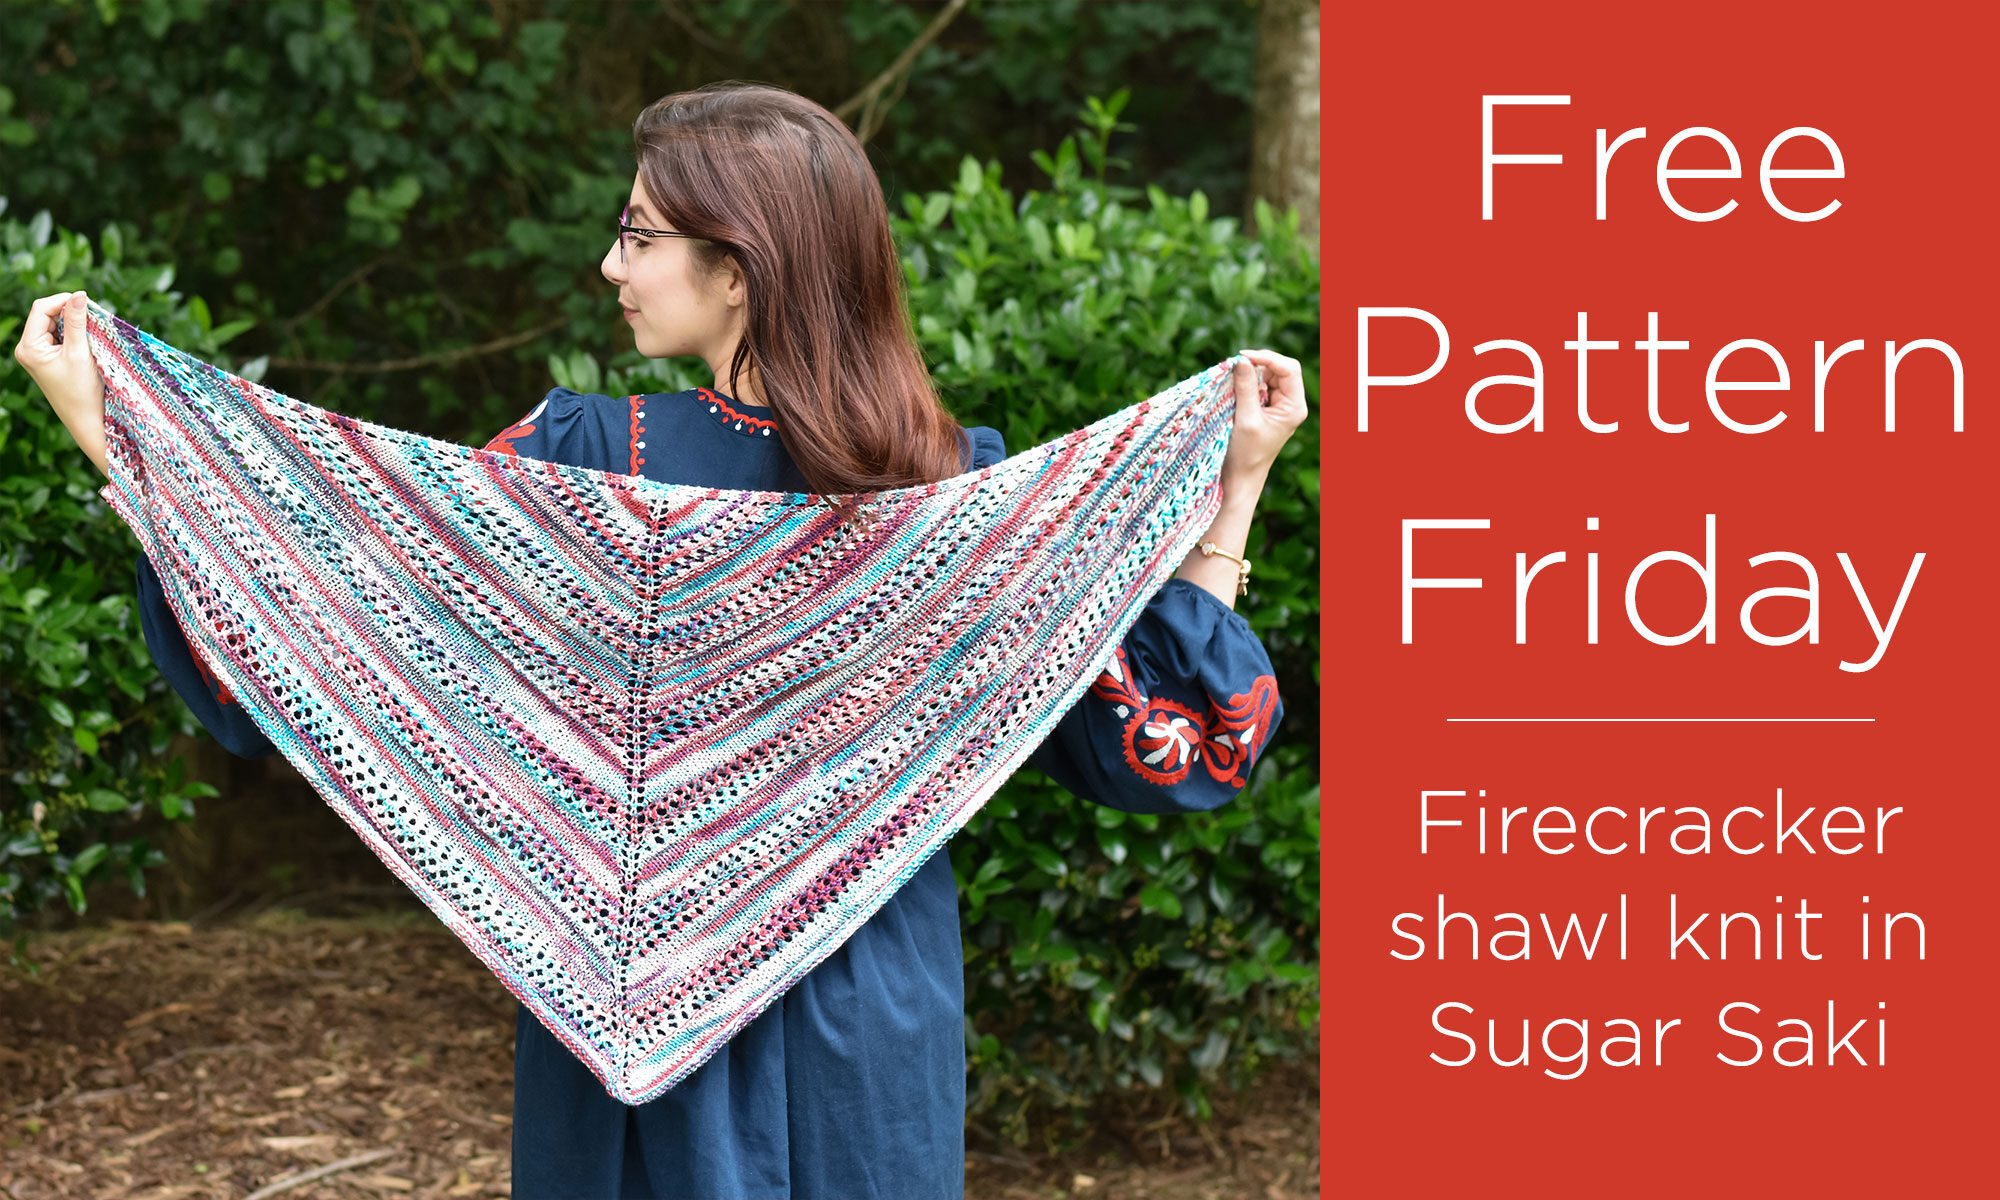 Photo of a person holding out the Firecracker shawl behind their back with the text to the right saying "Free Pattern Friday - Firecracker shawl knit in Sugar Saki"